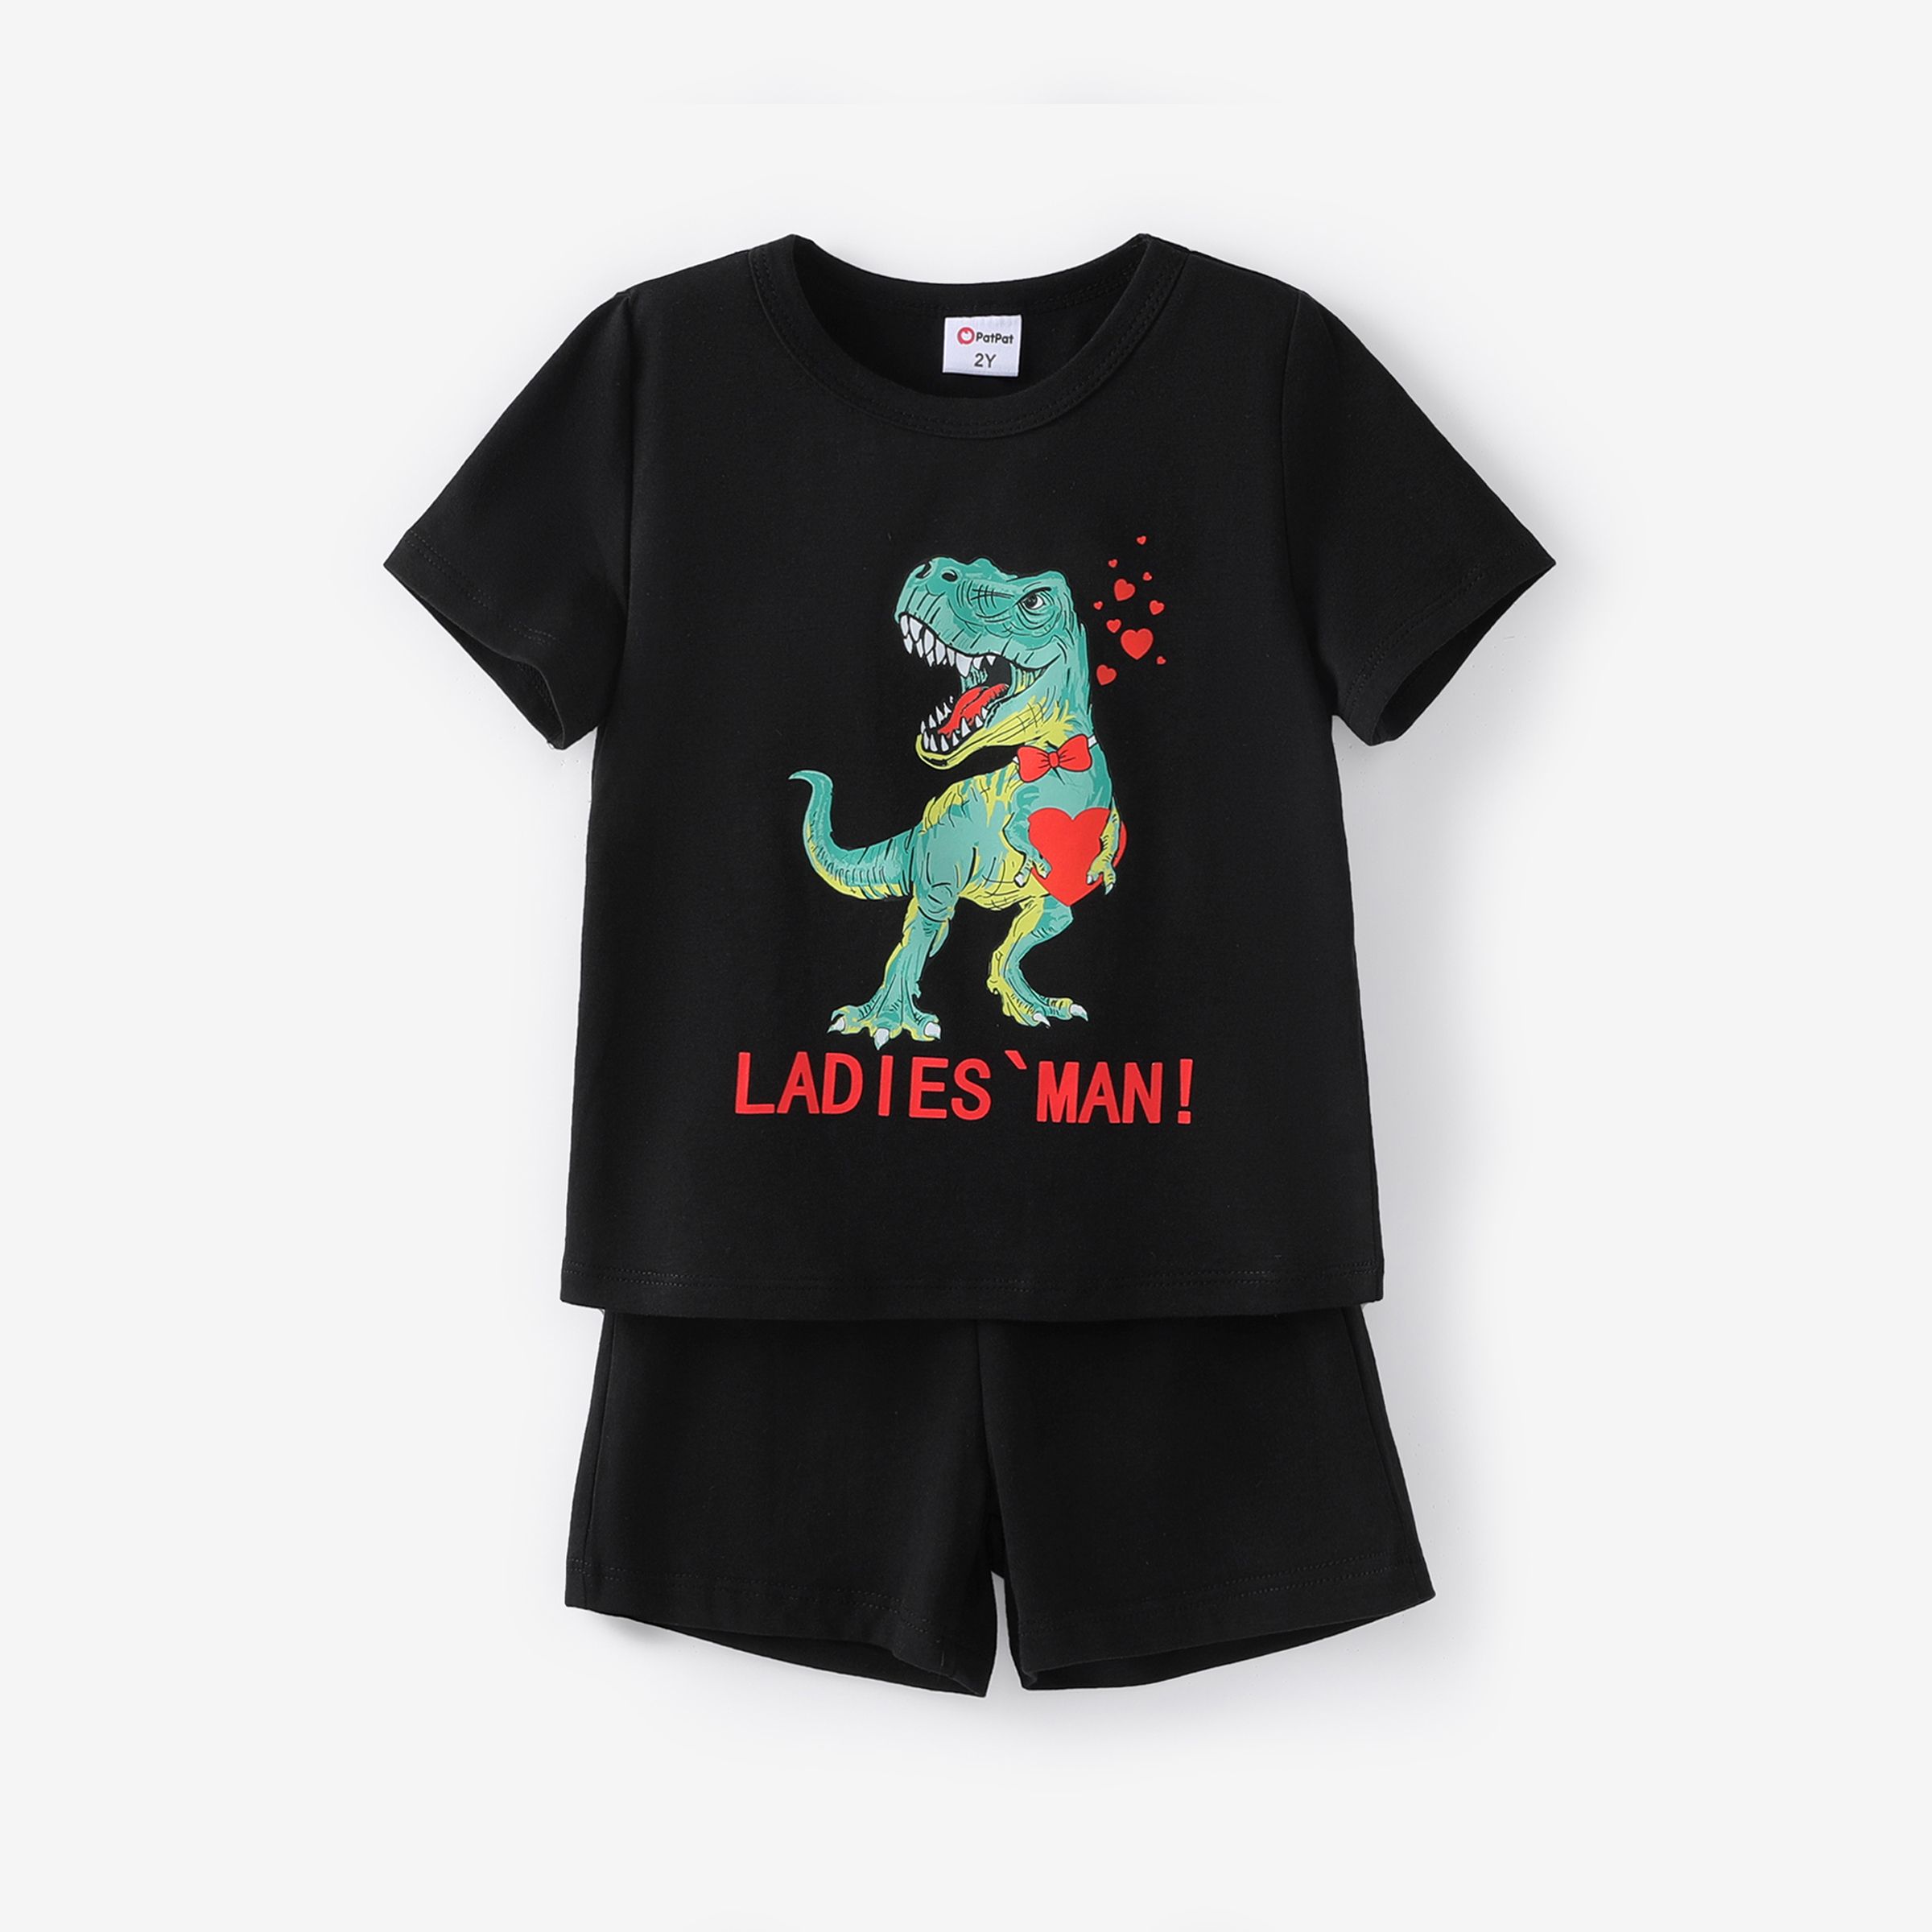 Toddler Boy Valentine's Day 2pcs Dinosaur Print Tee and shorts Set/Canvas Shoes